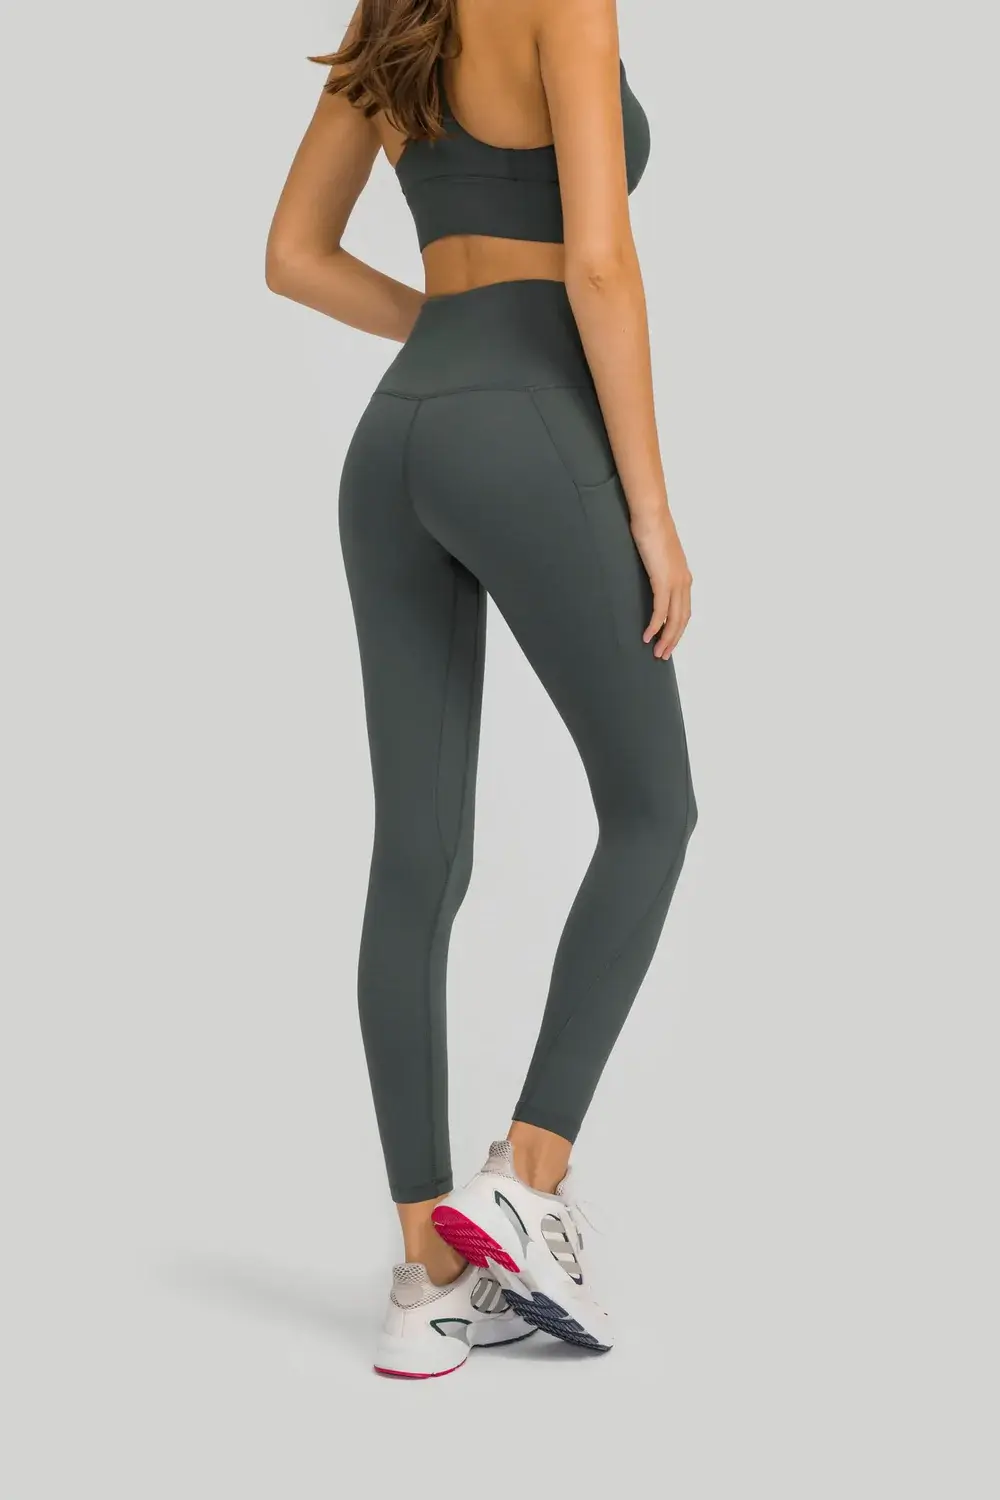 https://dropinblog.net/34246272/files/featured/compression_tights.webp